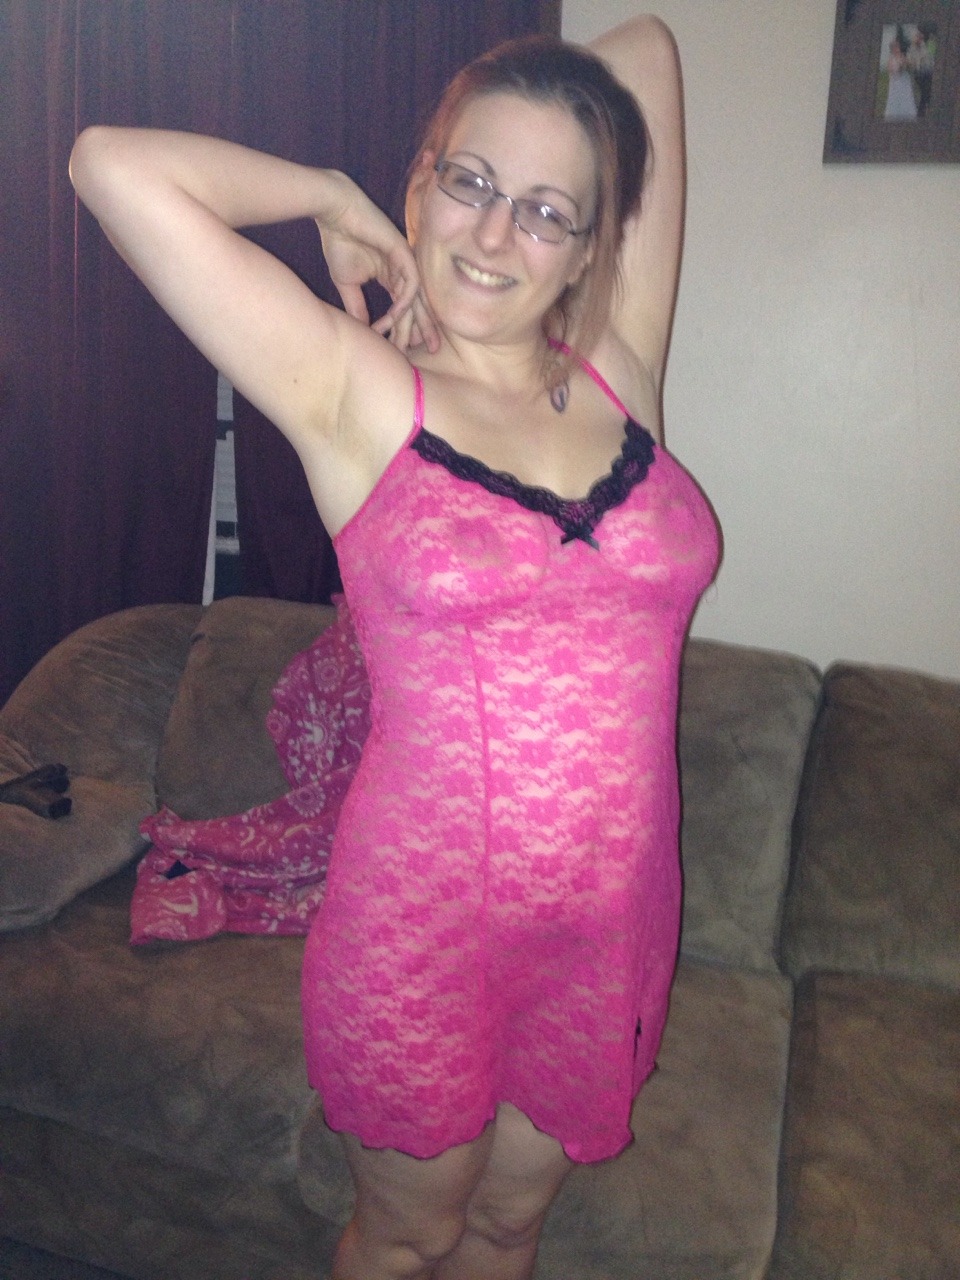 nycoupleshow:  Wife surprised me when I walked back into the house.    Follow usHttp://nycoupleshow.tumblr.com